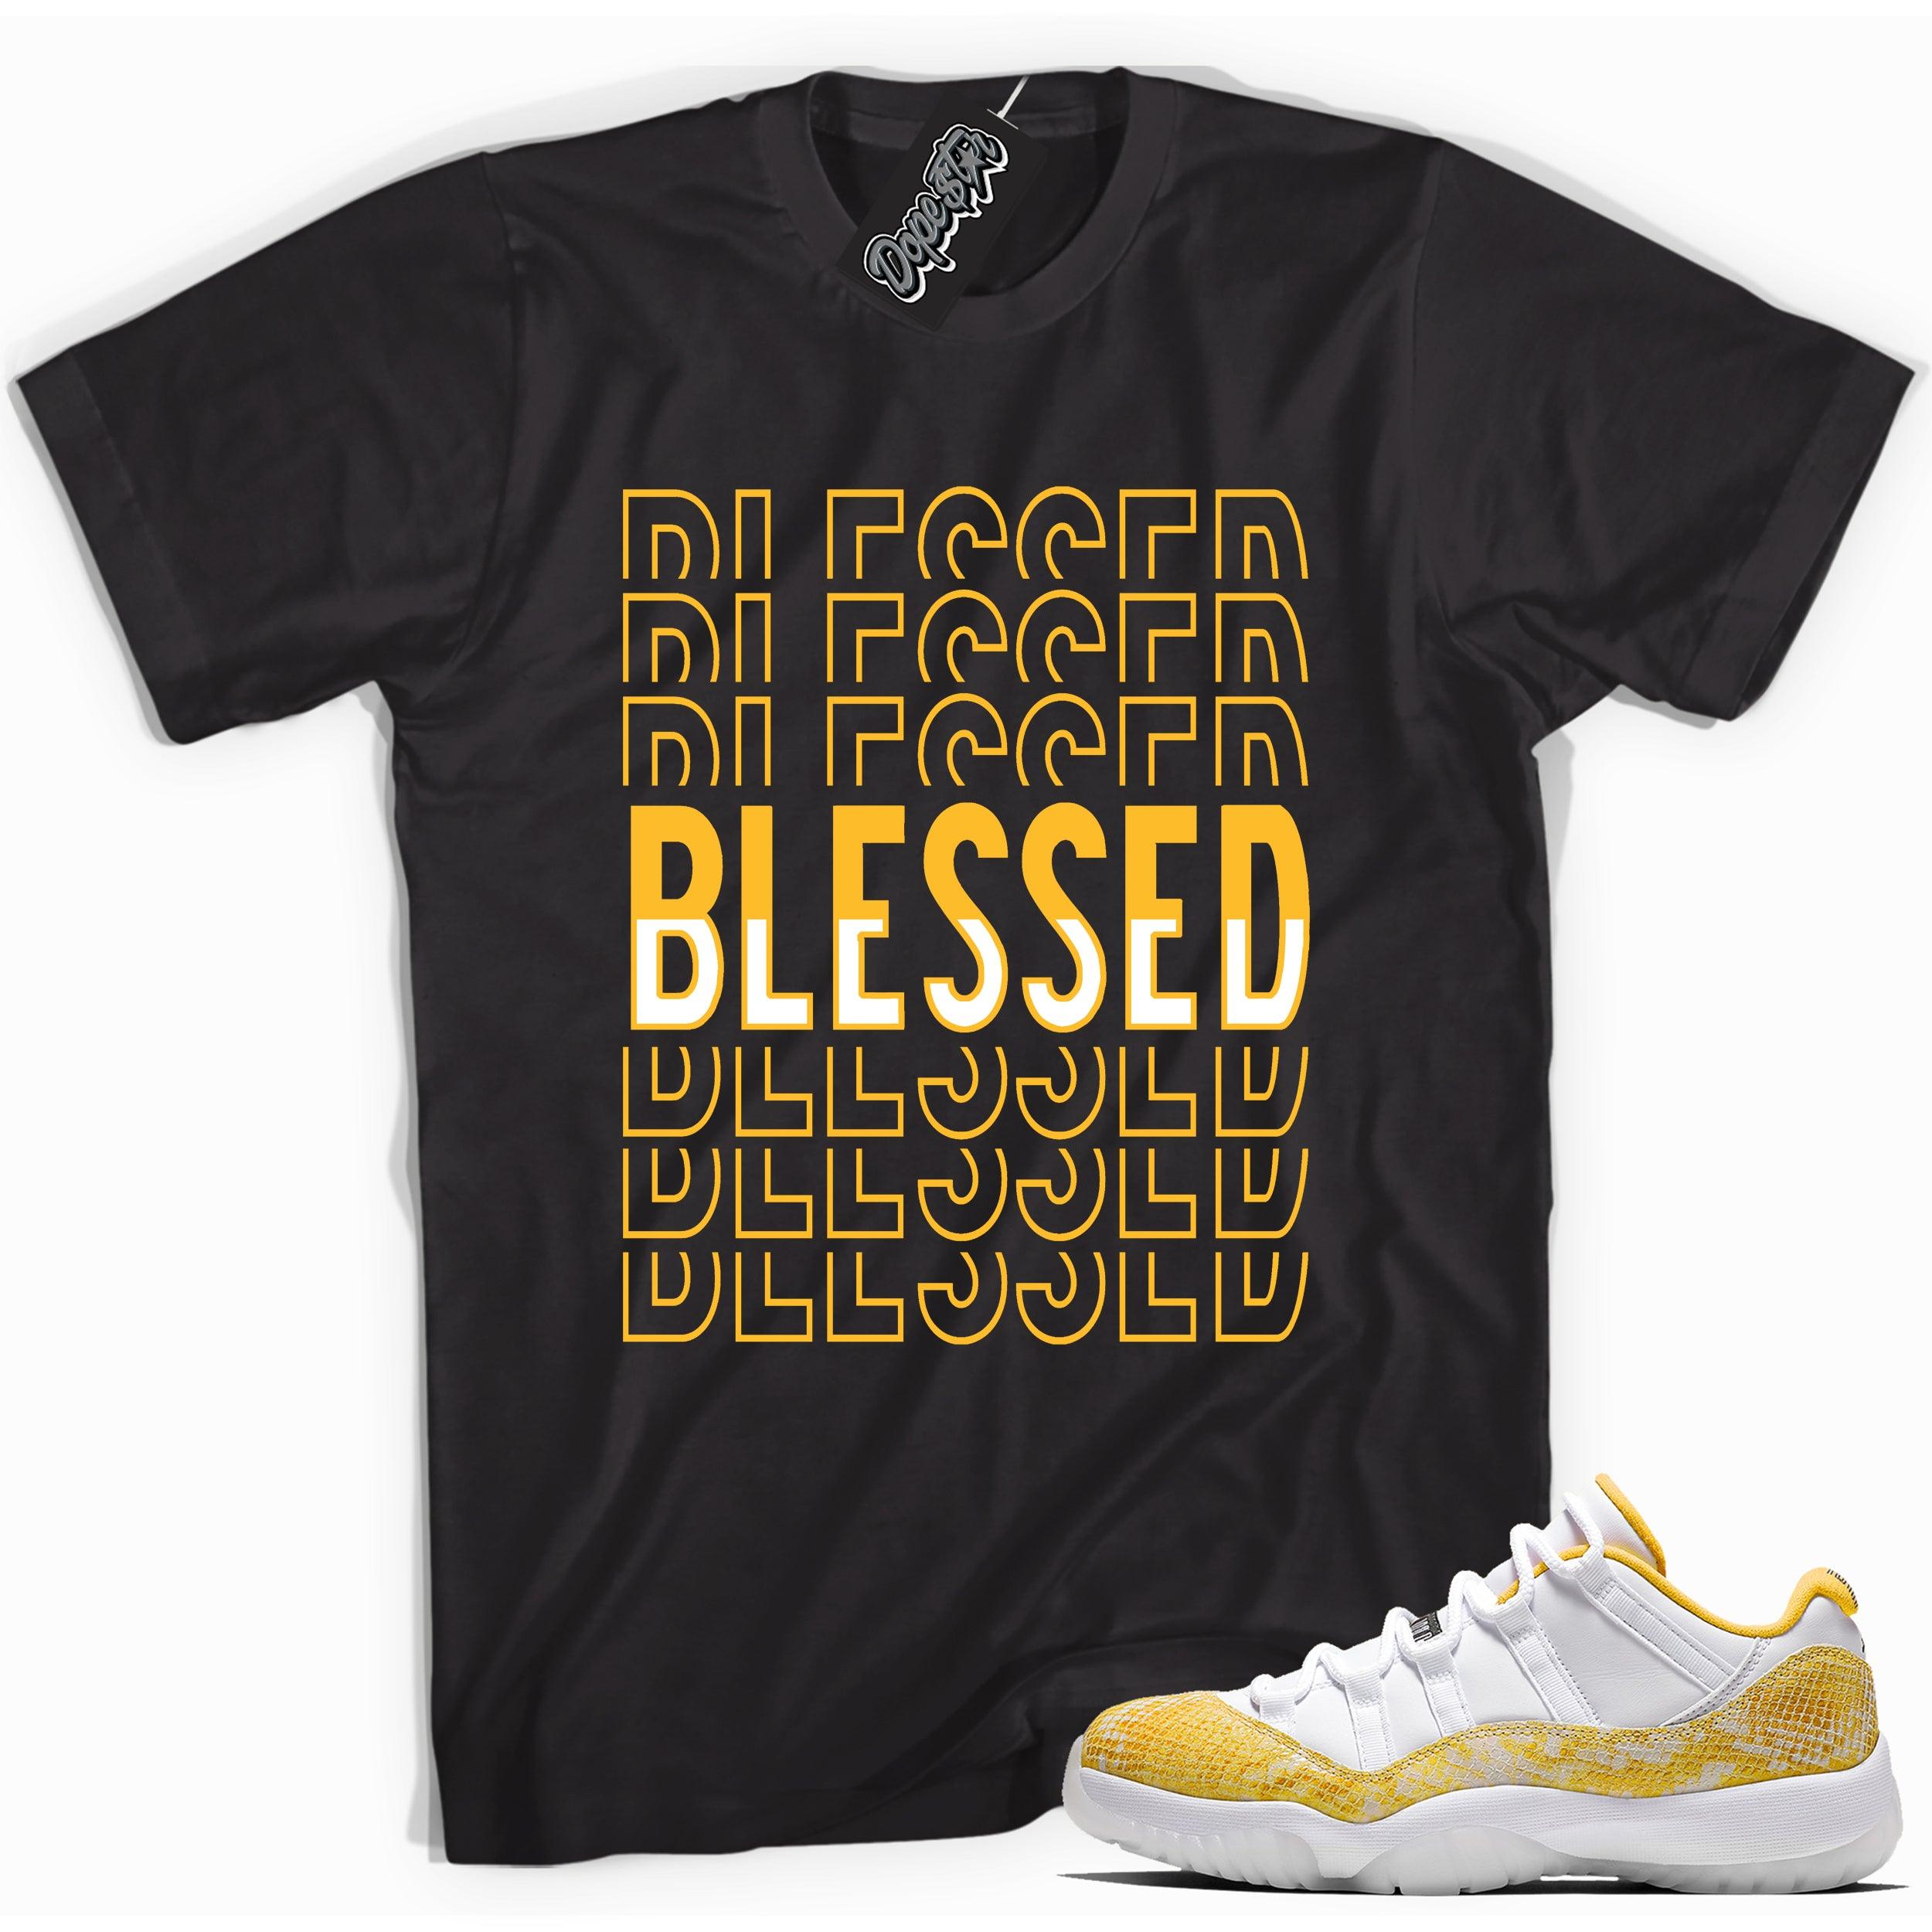 Cool black graphic tee with 'blessed' print, that perfectly matches  Air Jordan 11 Low Yellow Snakeskin sneakers